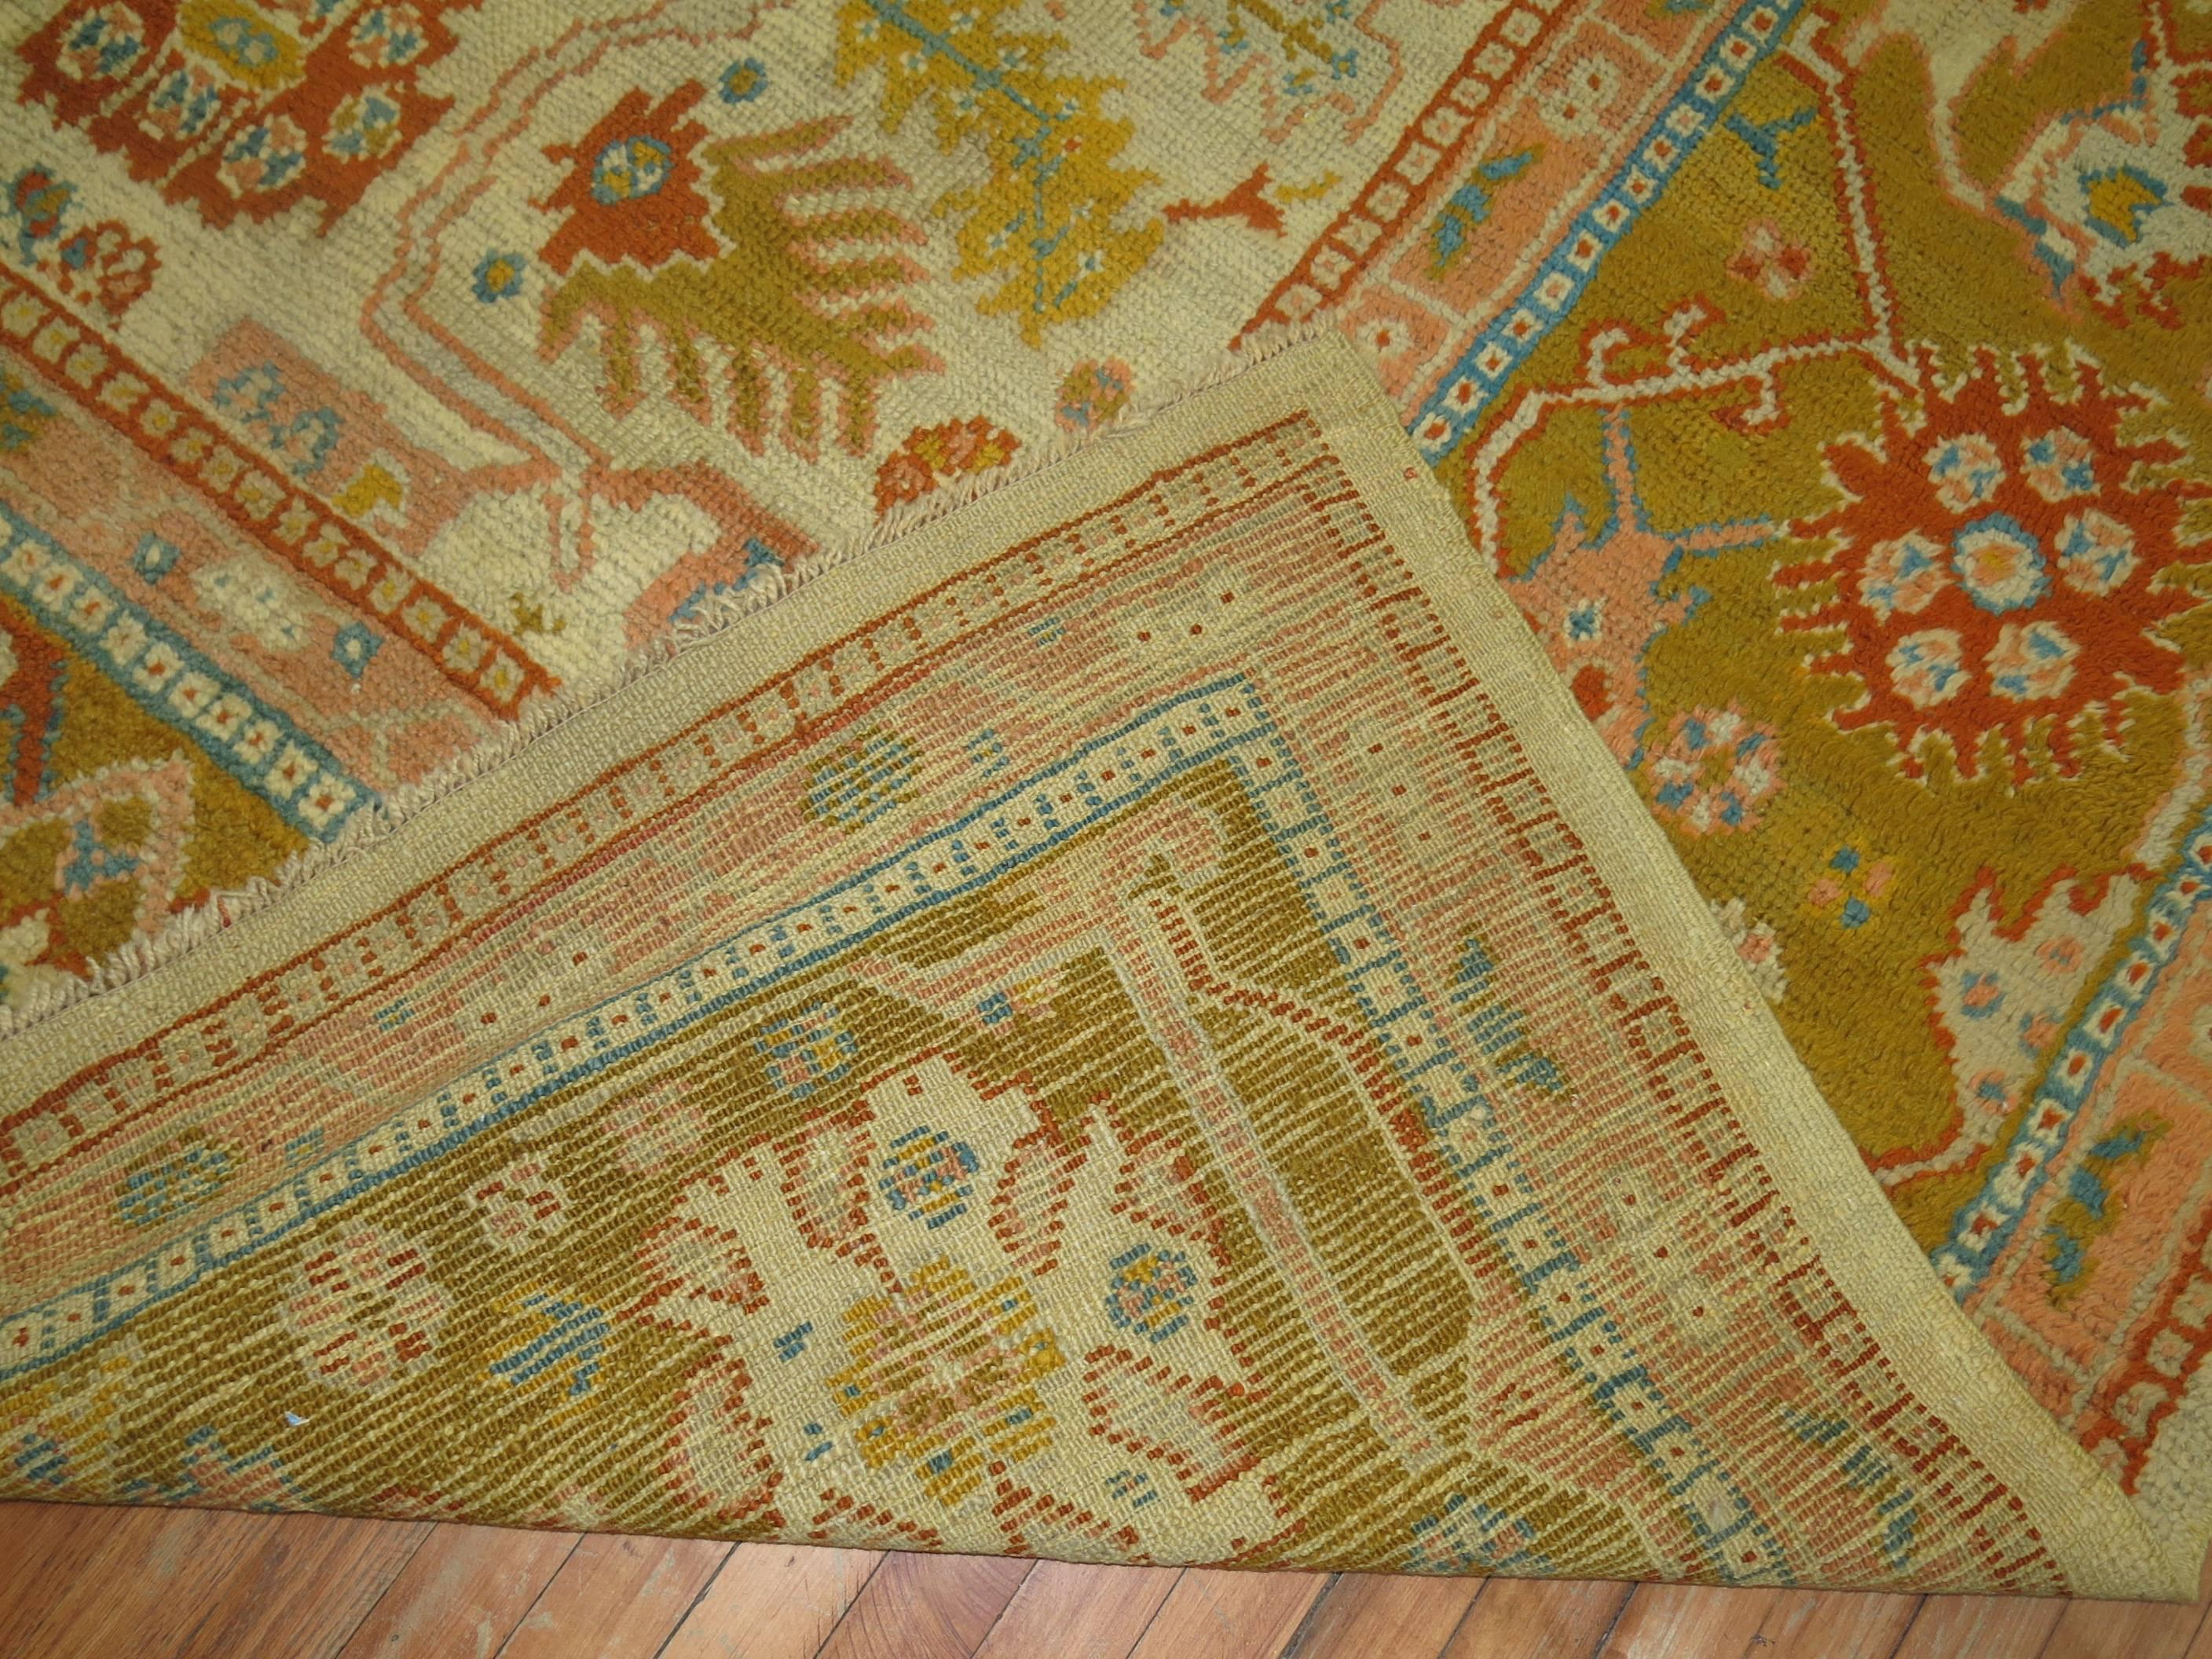 An early 20th century excellent condition all-over large scale design colorful Turkish Oushak rug. Images seen are from dark and light side so you can see full extent colors and detail from both directions.

Measures: 14' x 16'1''

Oushak rugs